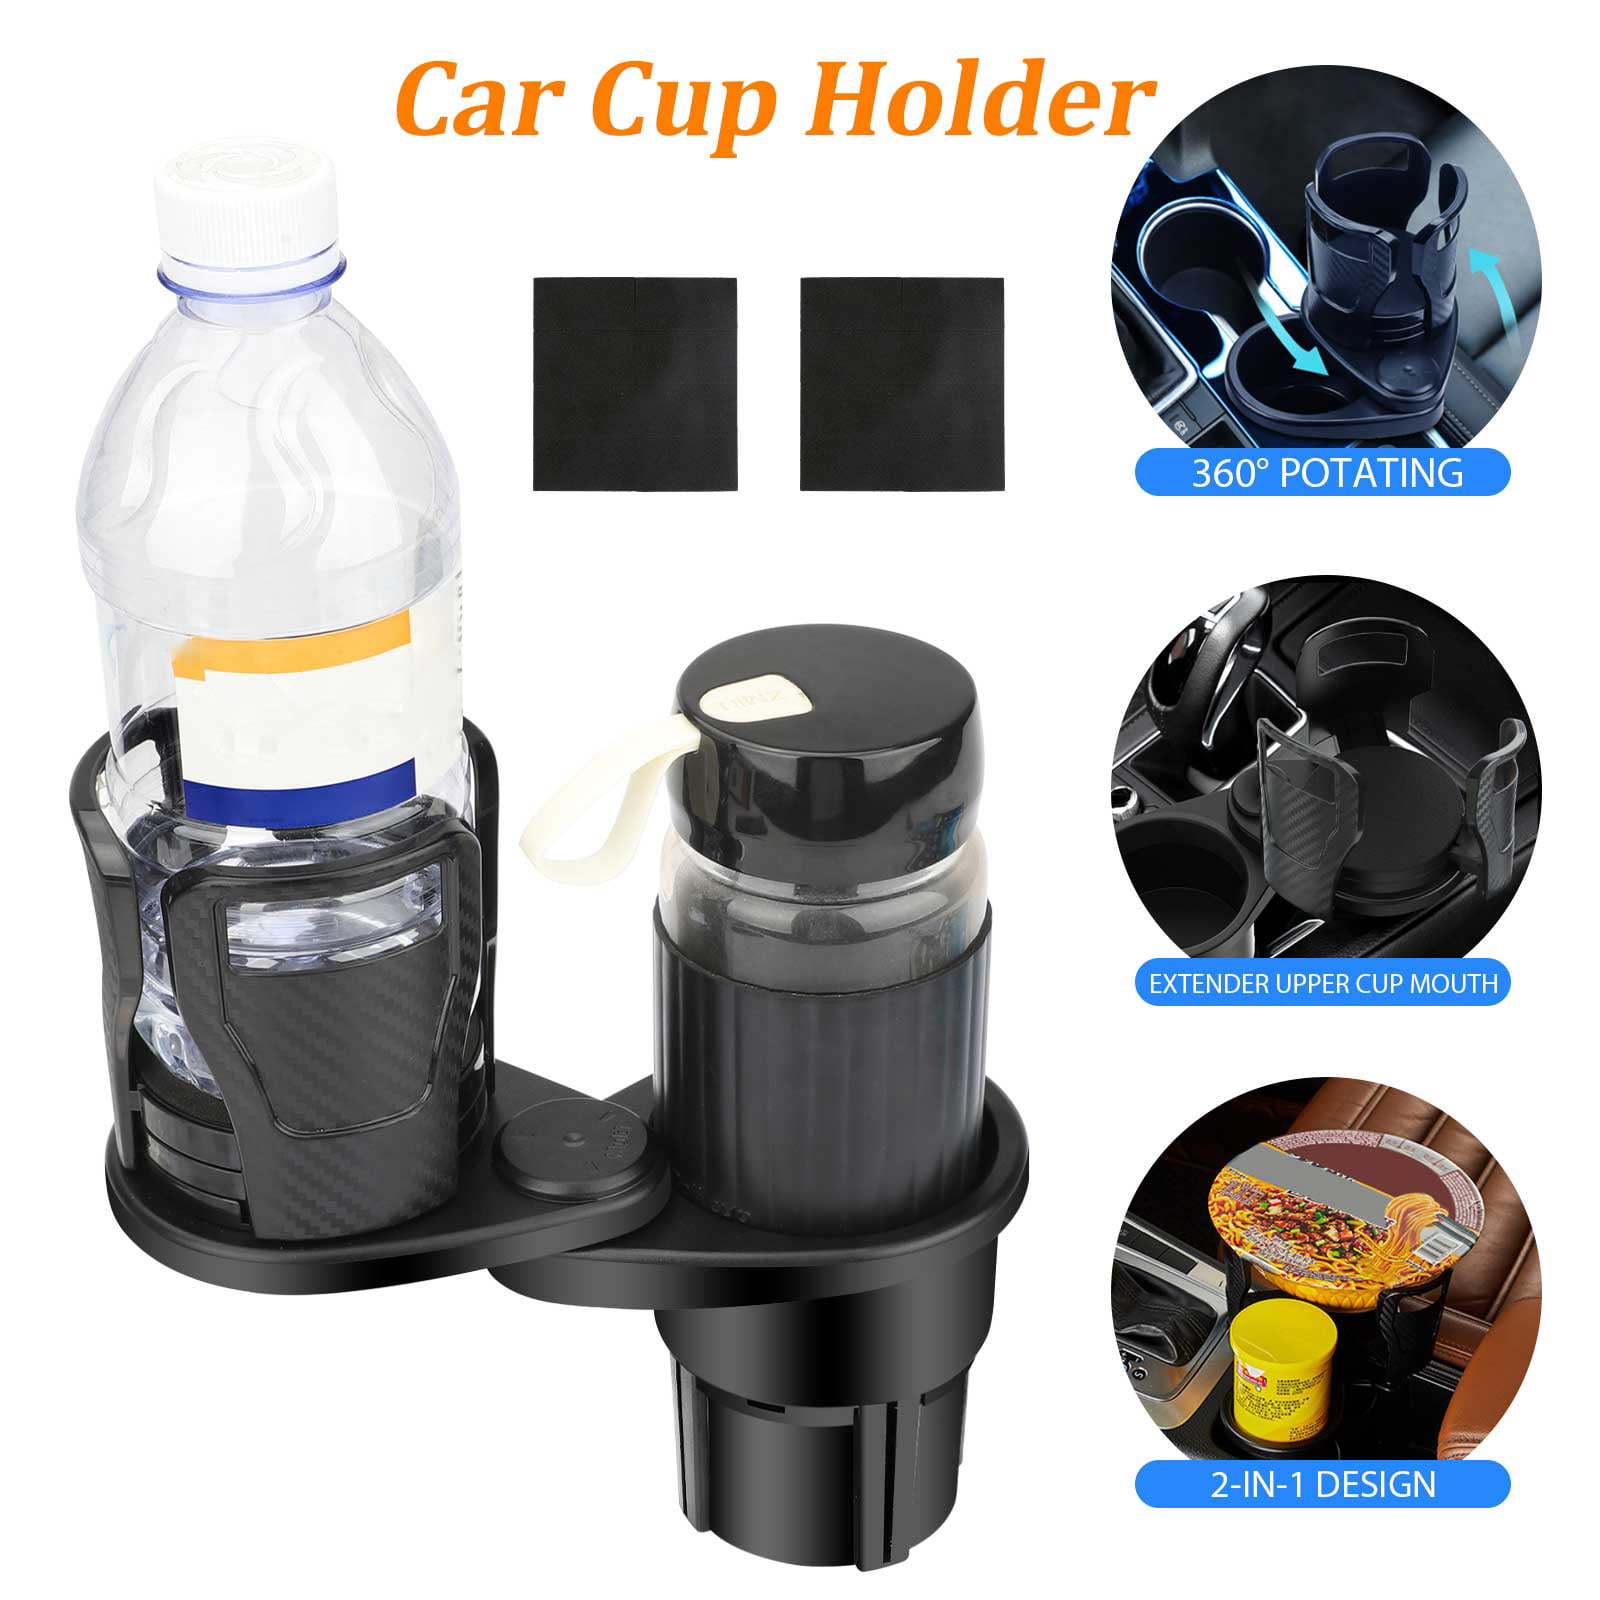 Cup Holder Adapter for cars RVs GRAY holds mugs cups bottles boats trucks 